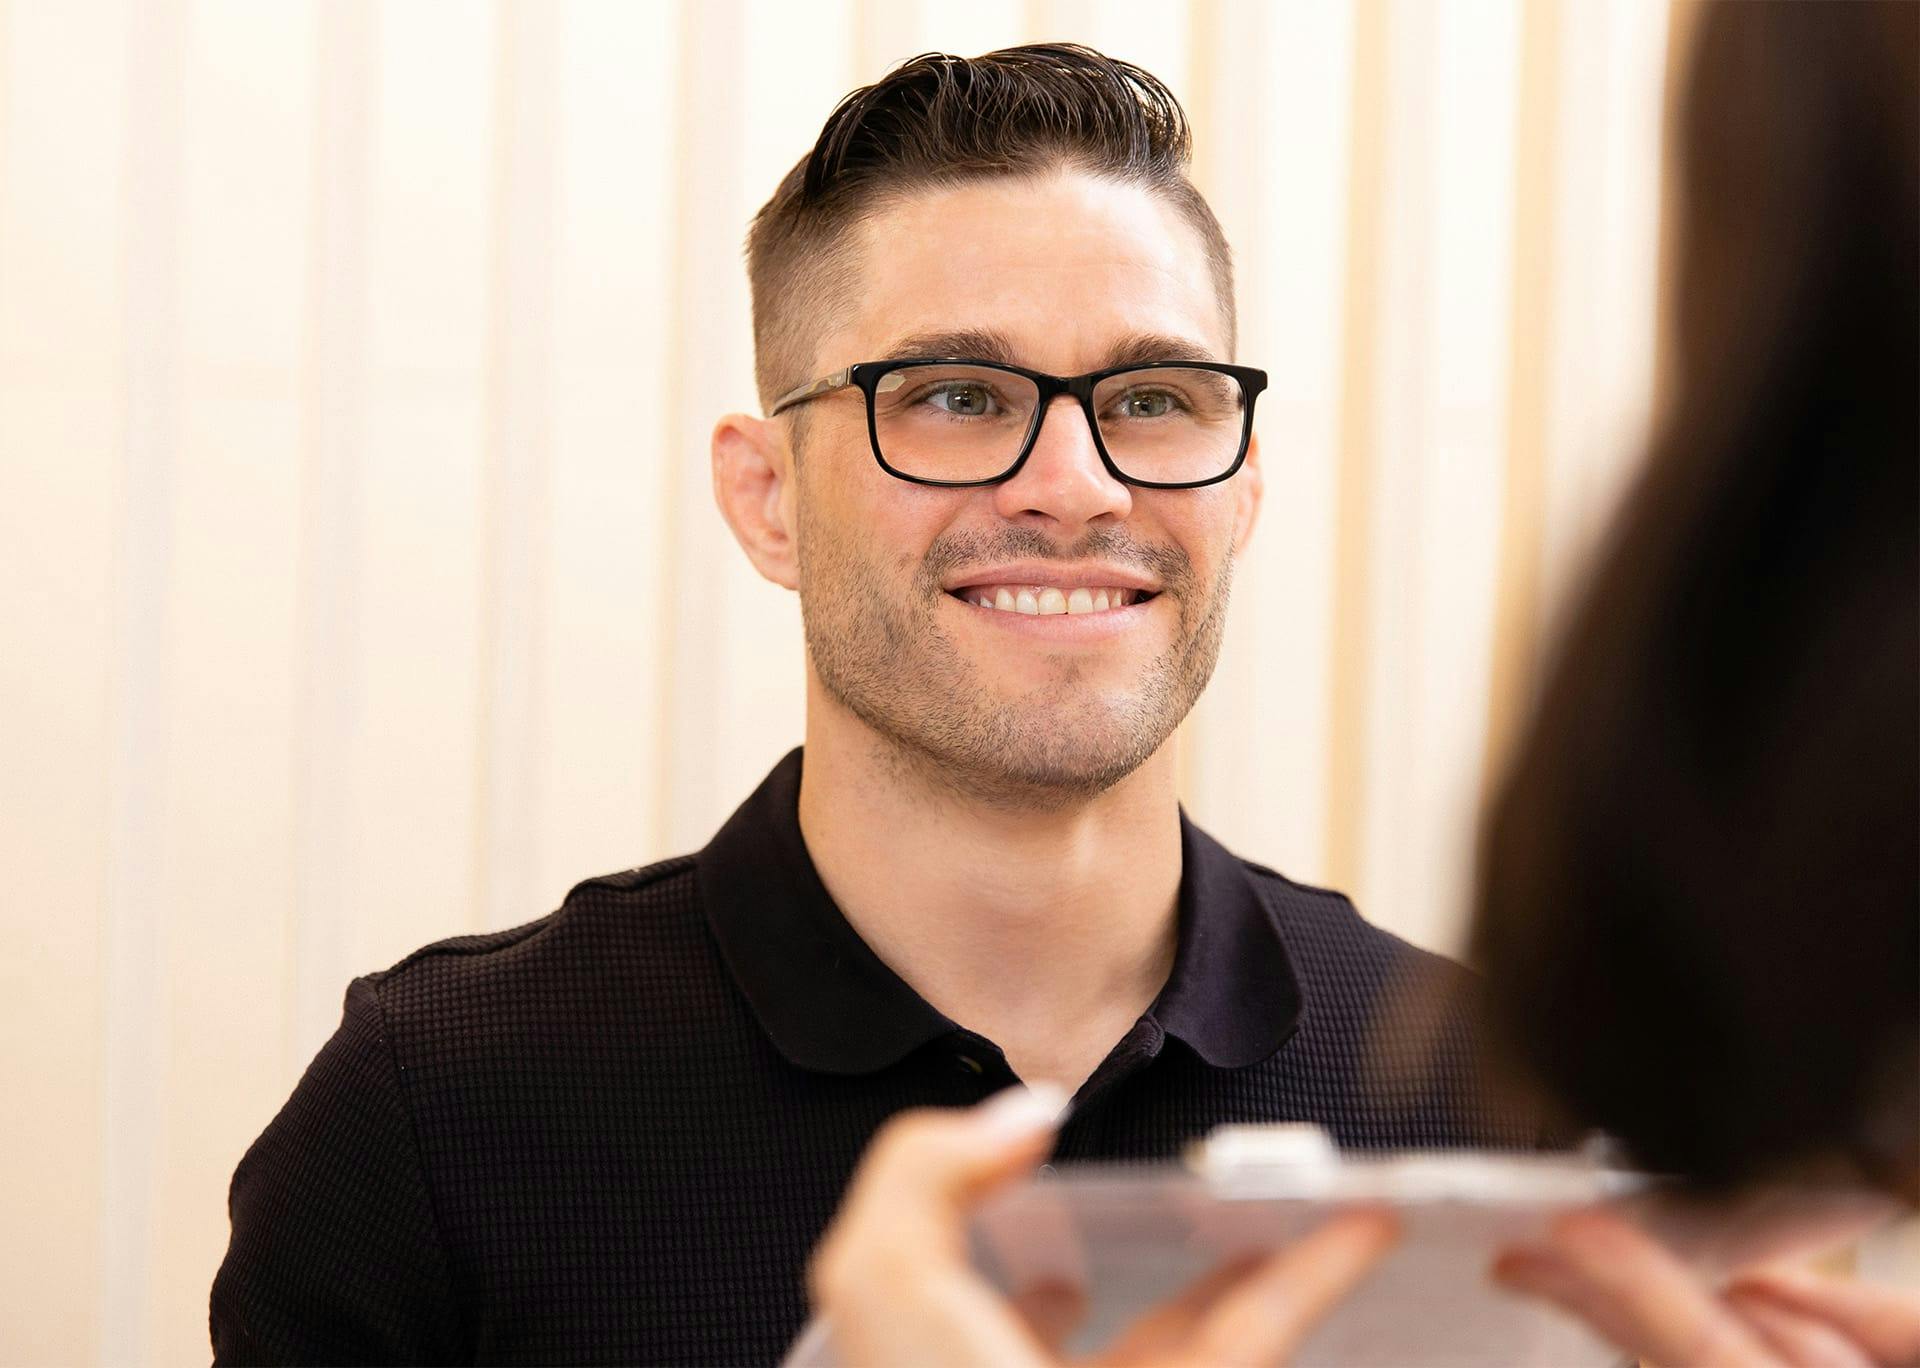 Receptionist helping smiling patient wearing glasses